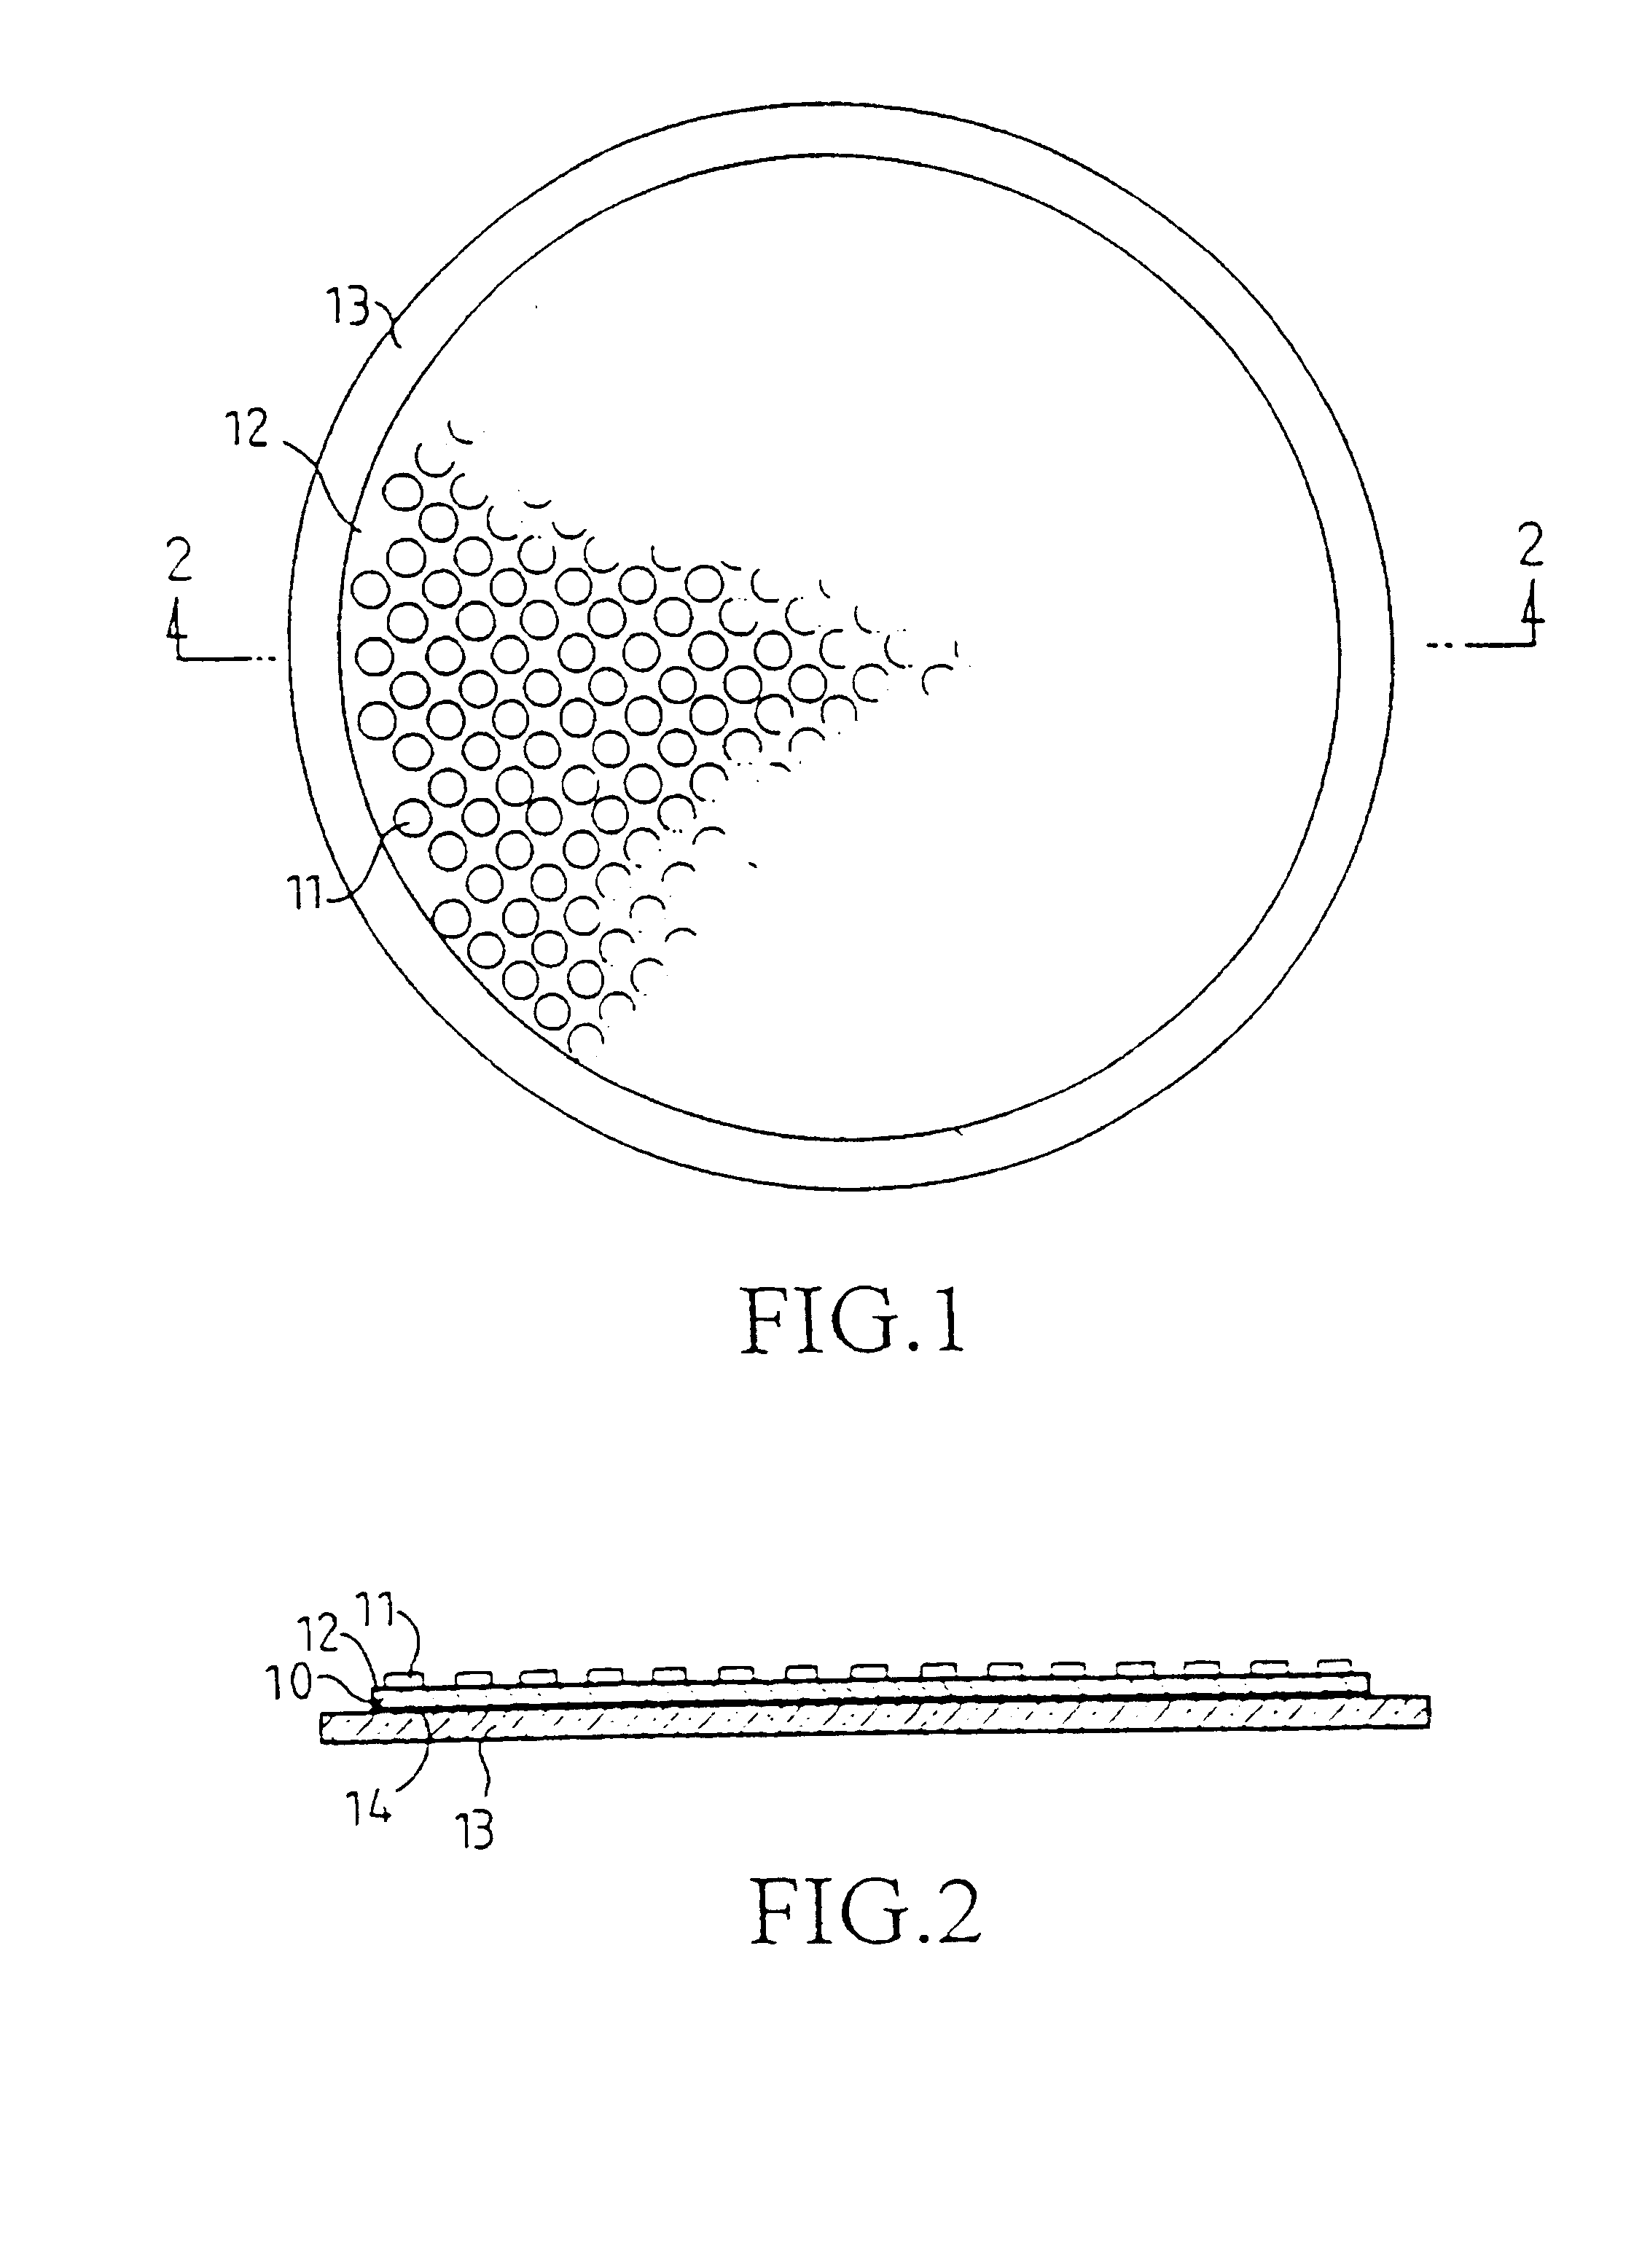 Apparatus for attaching resists and wafers to substrates